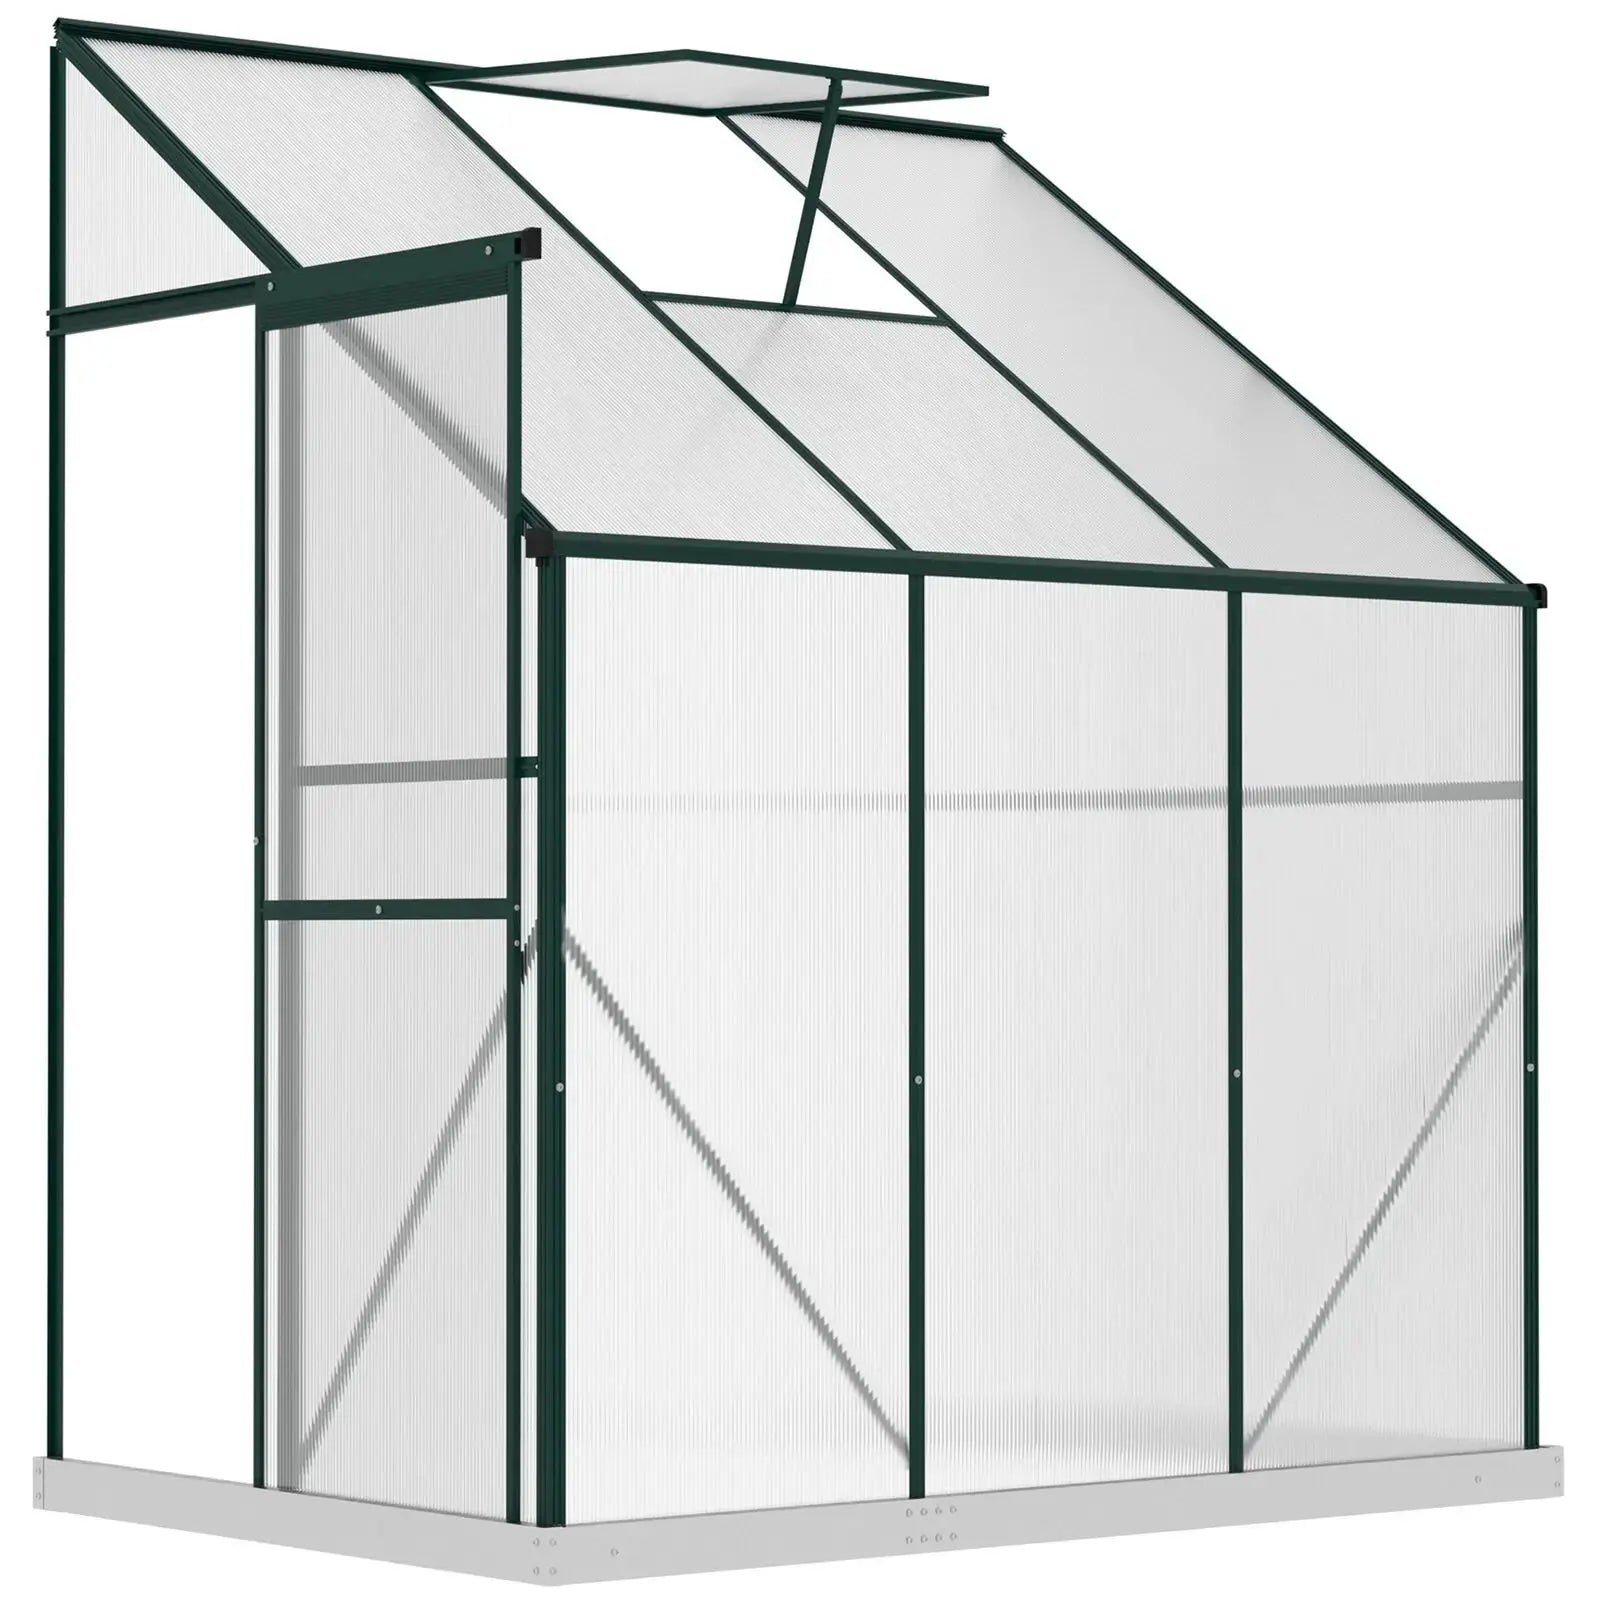 6' x 4' x 7'Aluminum Greenhouse, Polystyrene Walk-in Garden Greenhouse with 2 Adjustable Roof Vents and 3 Doors, Clear - The Greenhouse Pros